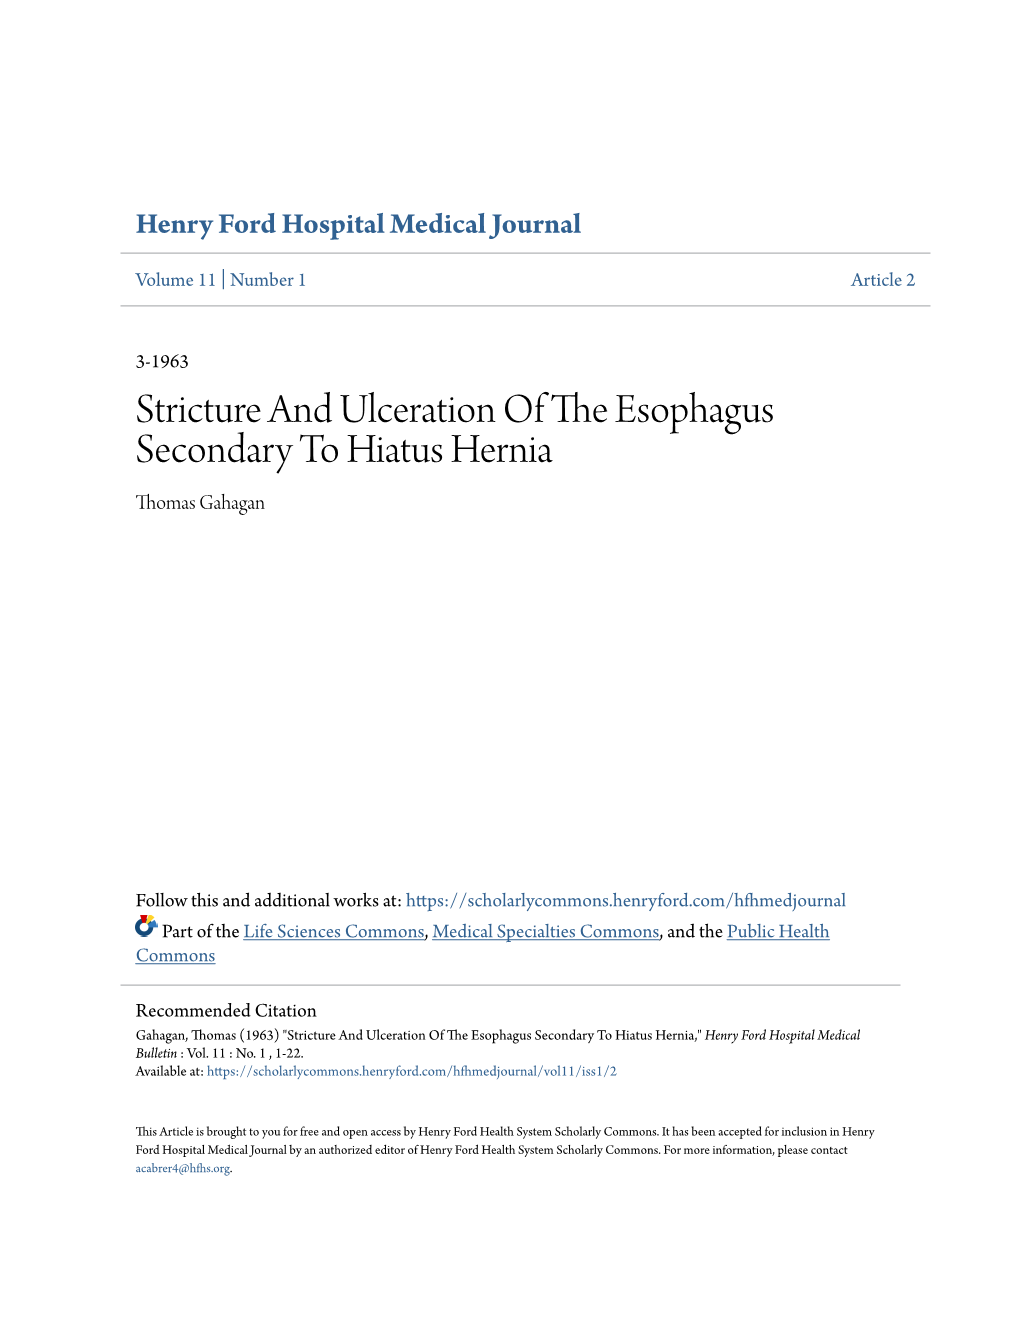 Stricture and Ulceration of the Esophagus Secondary to Hiatus Hernia Thomas Gahagan